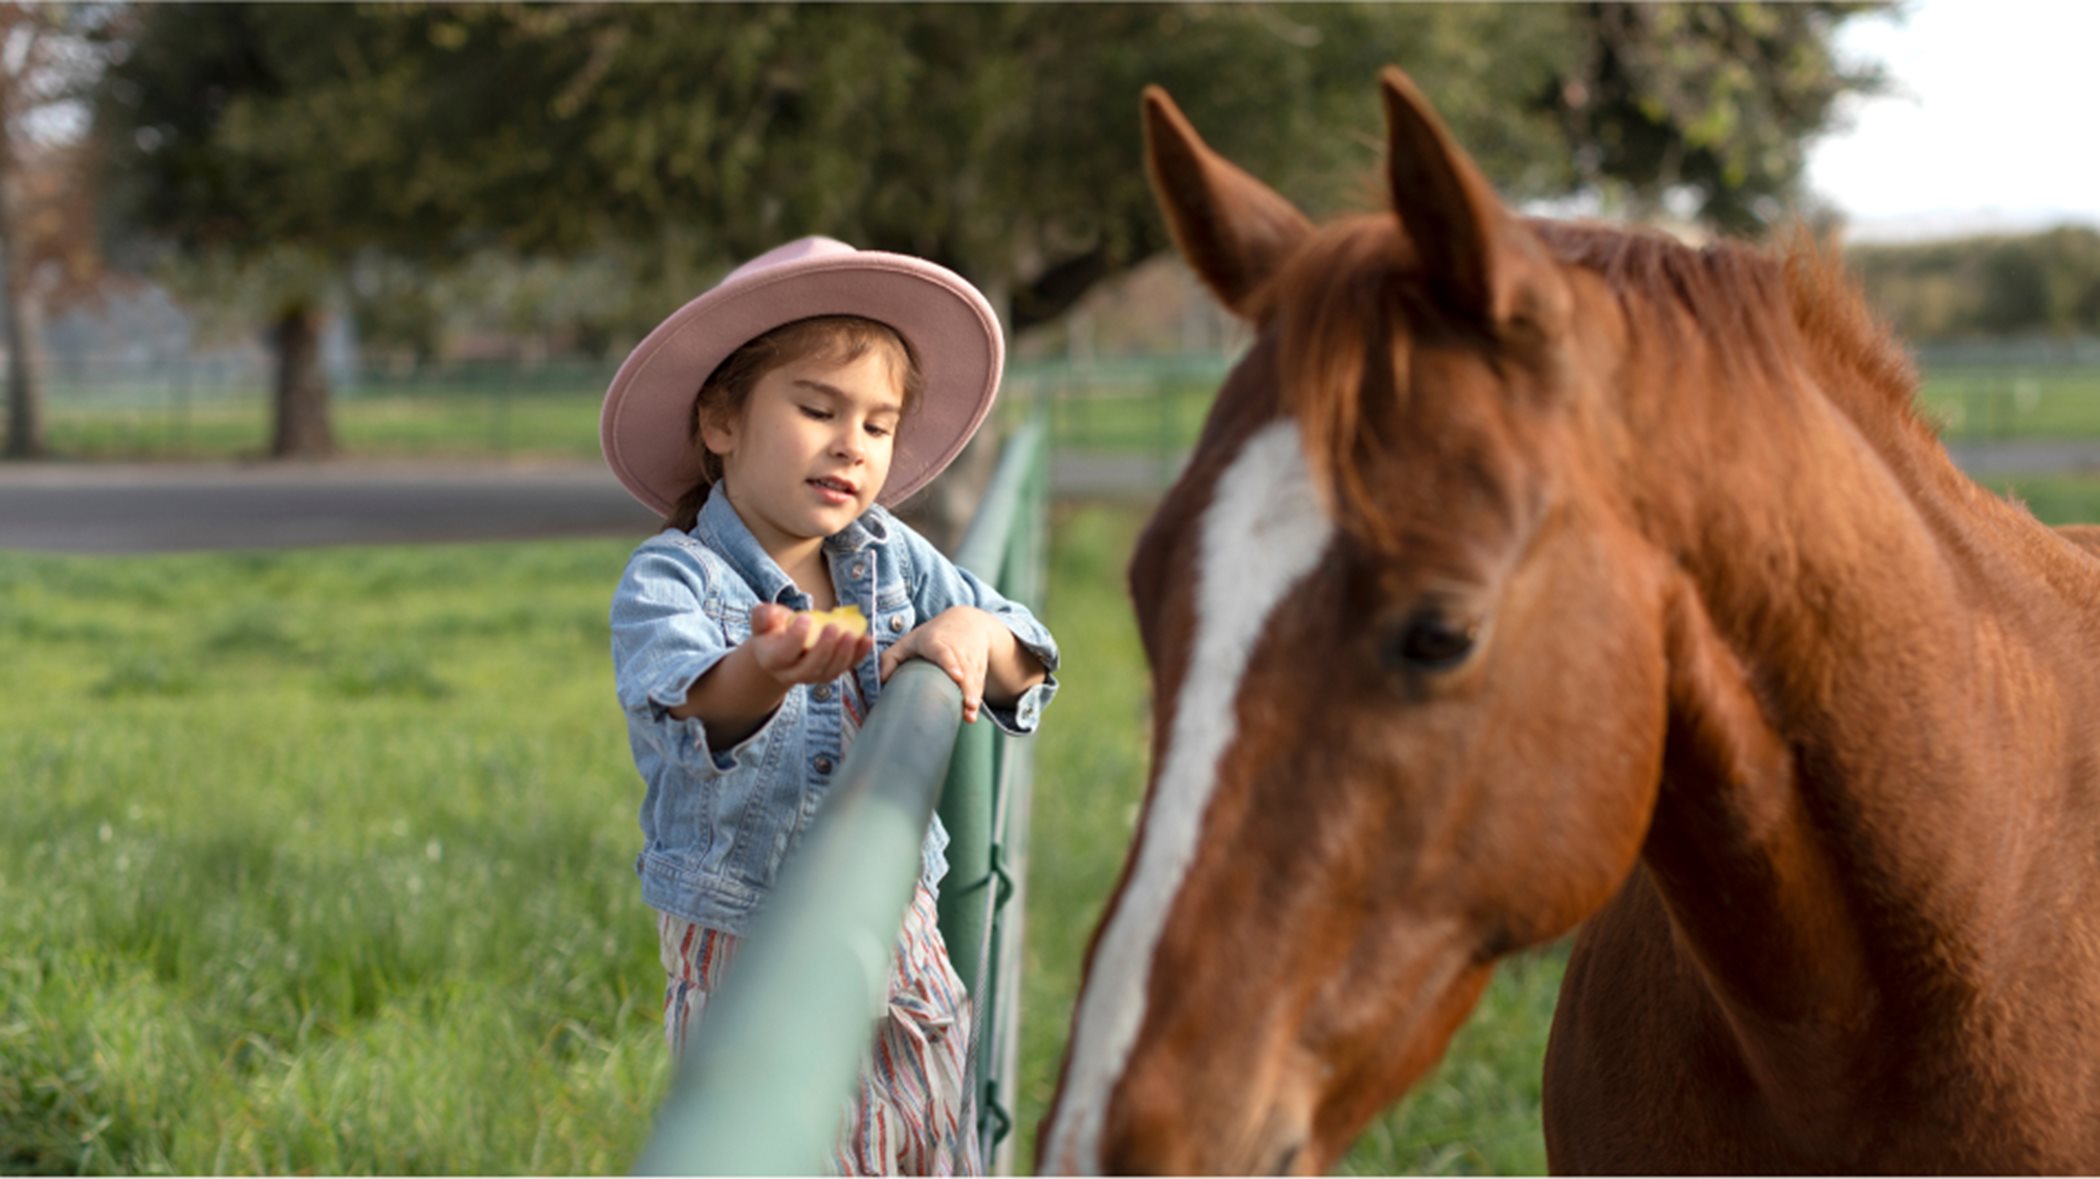 Child looking at a horse over a fence